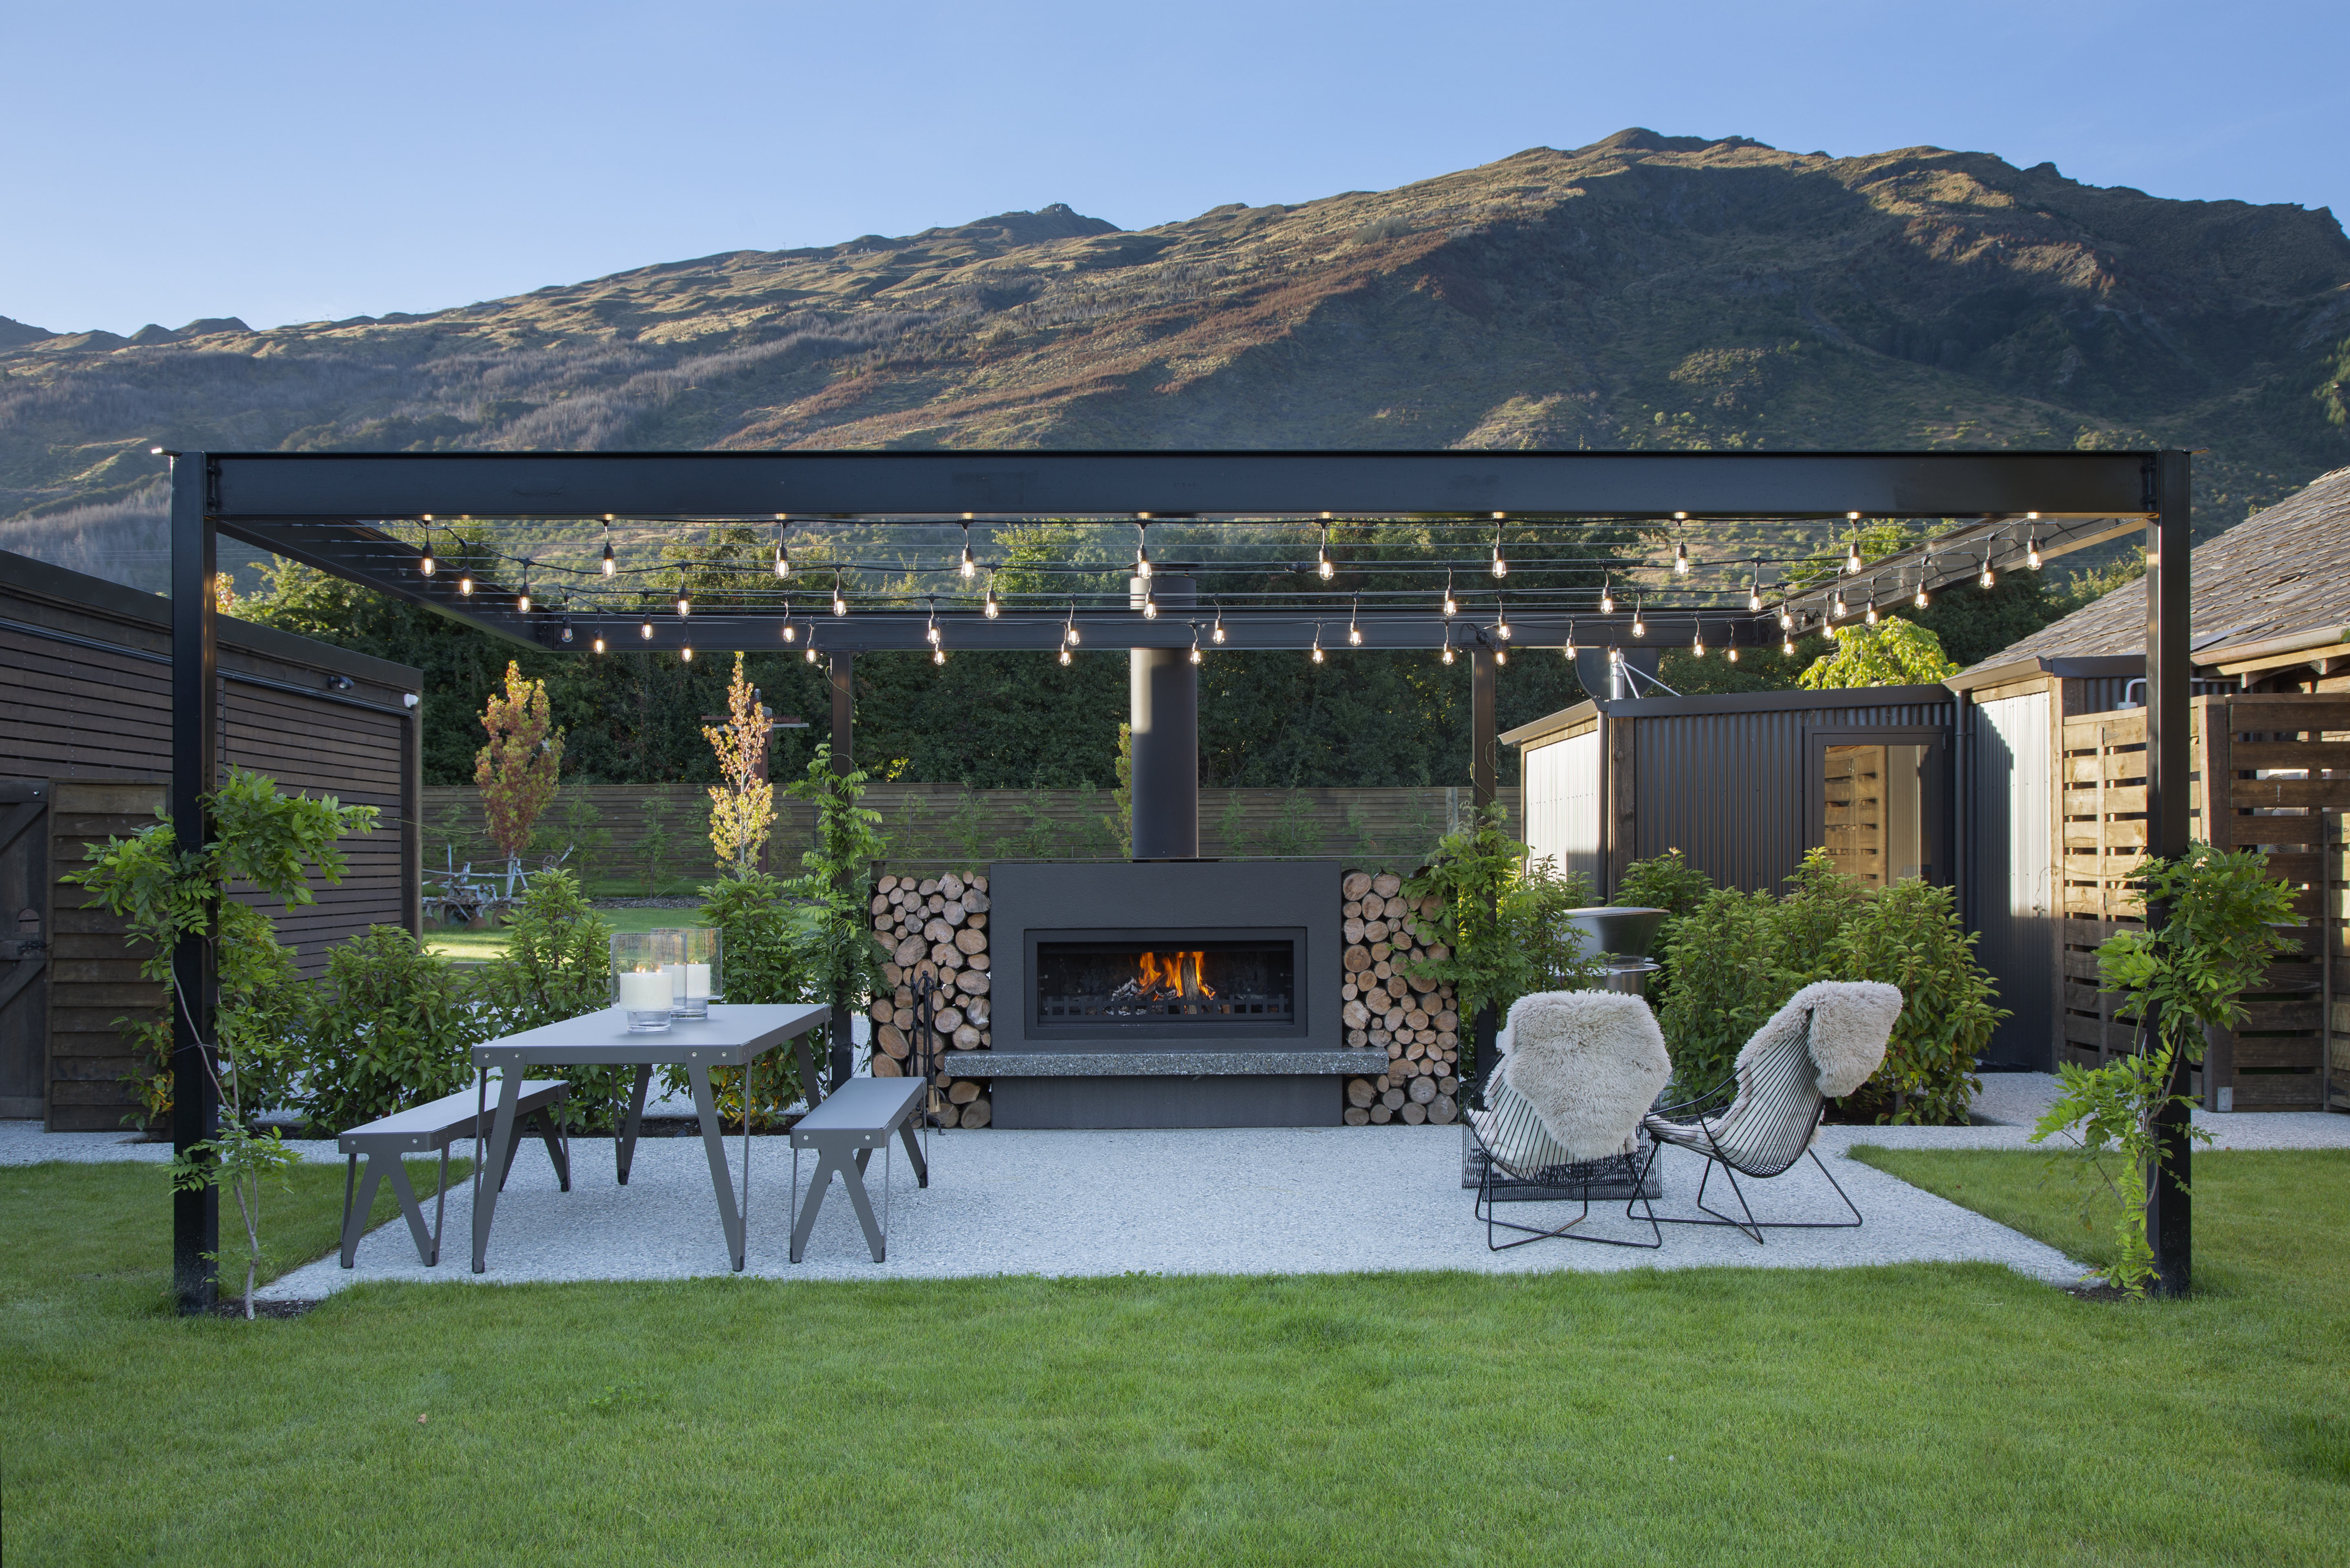 Outdoor trends 2019 - outdoor fireplace situated in an outdoor entertaining area